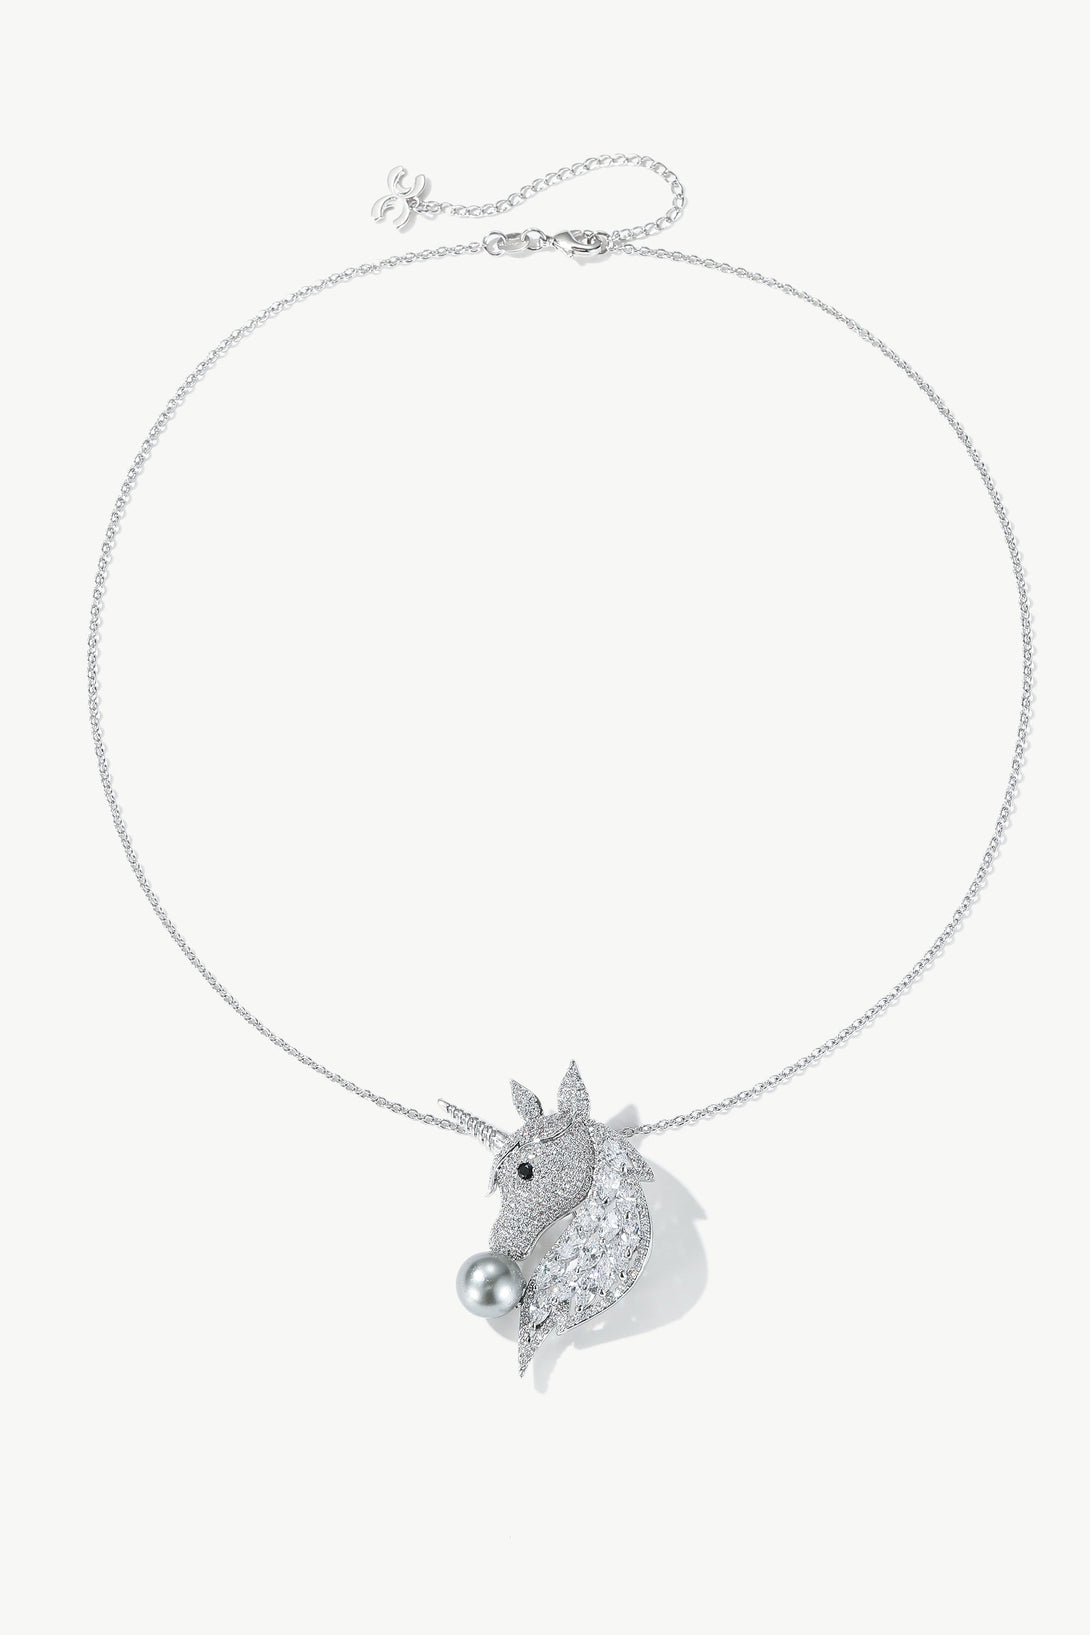 Silver Pavé Unicorn Brooch and Necklace Set - Classicharms